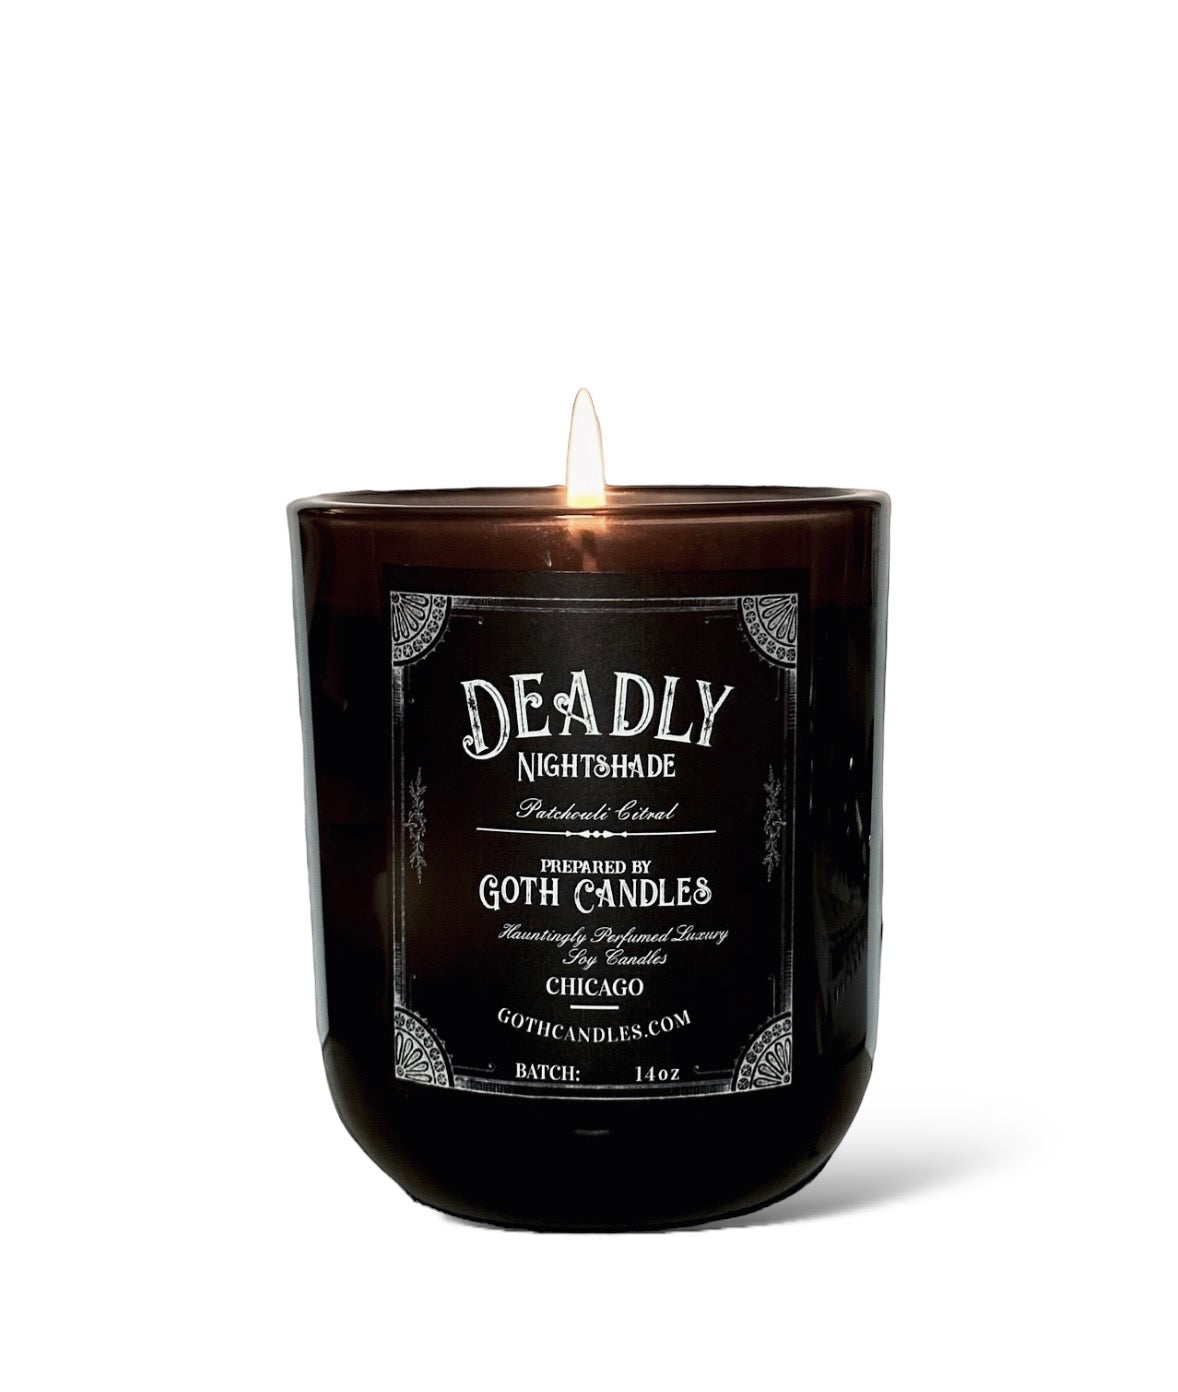 Patchouli Citral | Goth Candle | DEADLY NIGHTSHADE | 14oz Black Halloween Candle | Apothocary Candle | Soy Essential Oil Candle